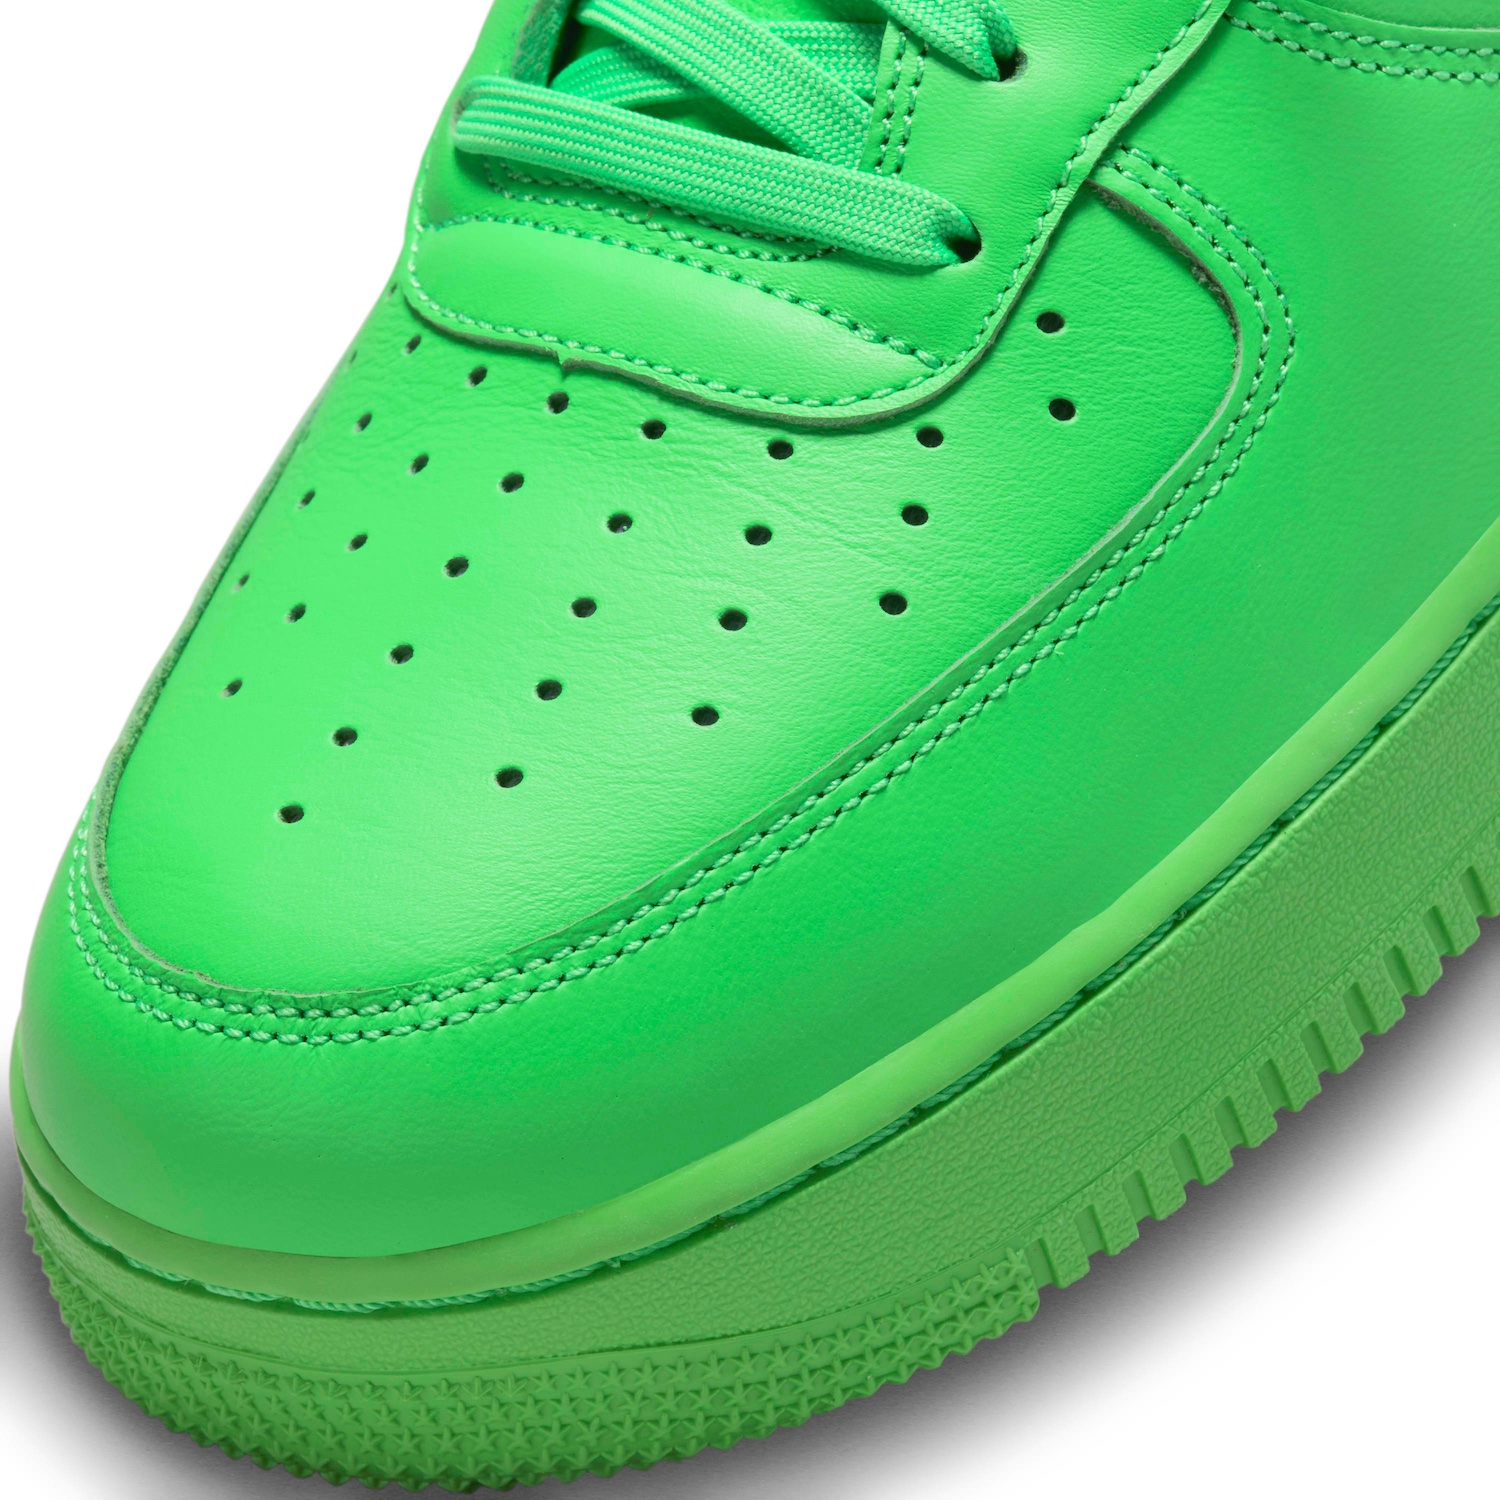 off-white-nike-air-force-1-sp-light-green-spark-brooklyn-museum-4.jpeg